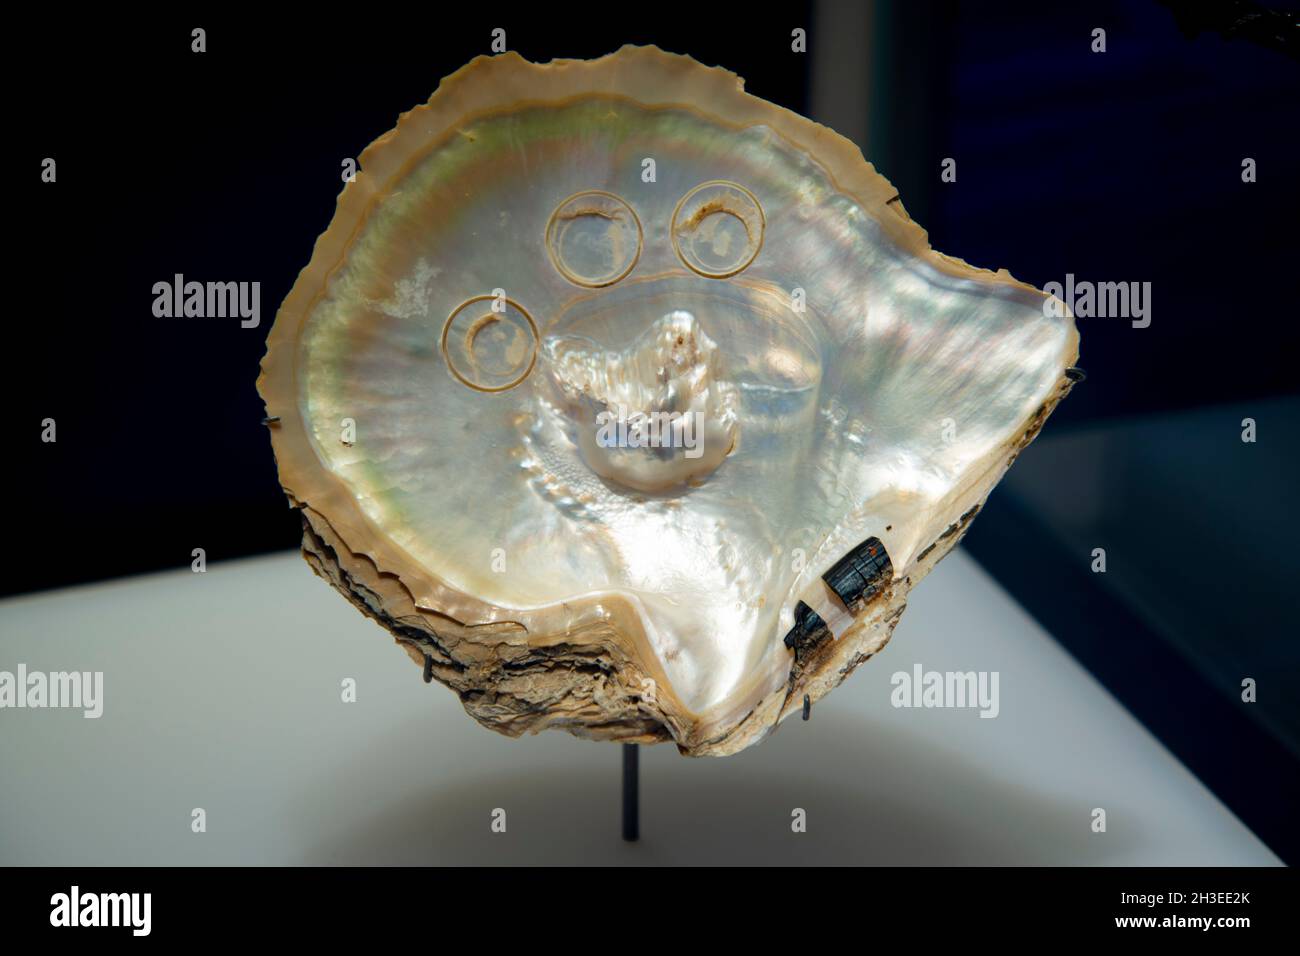 Inside Portion of Pearl Clam Shell Stock Photo